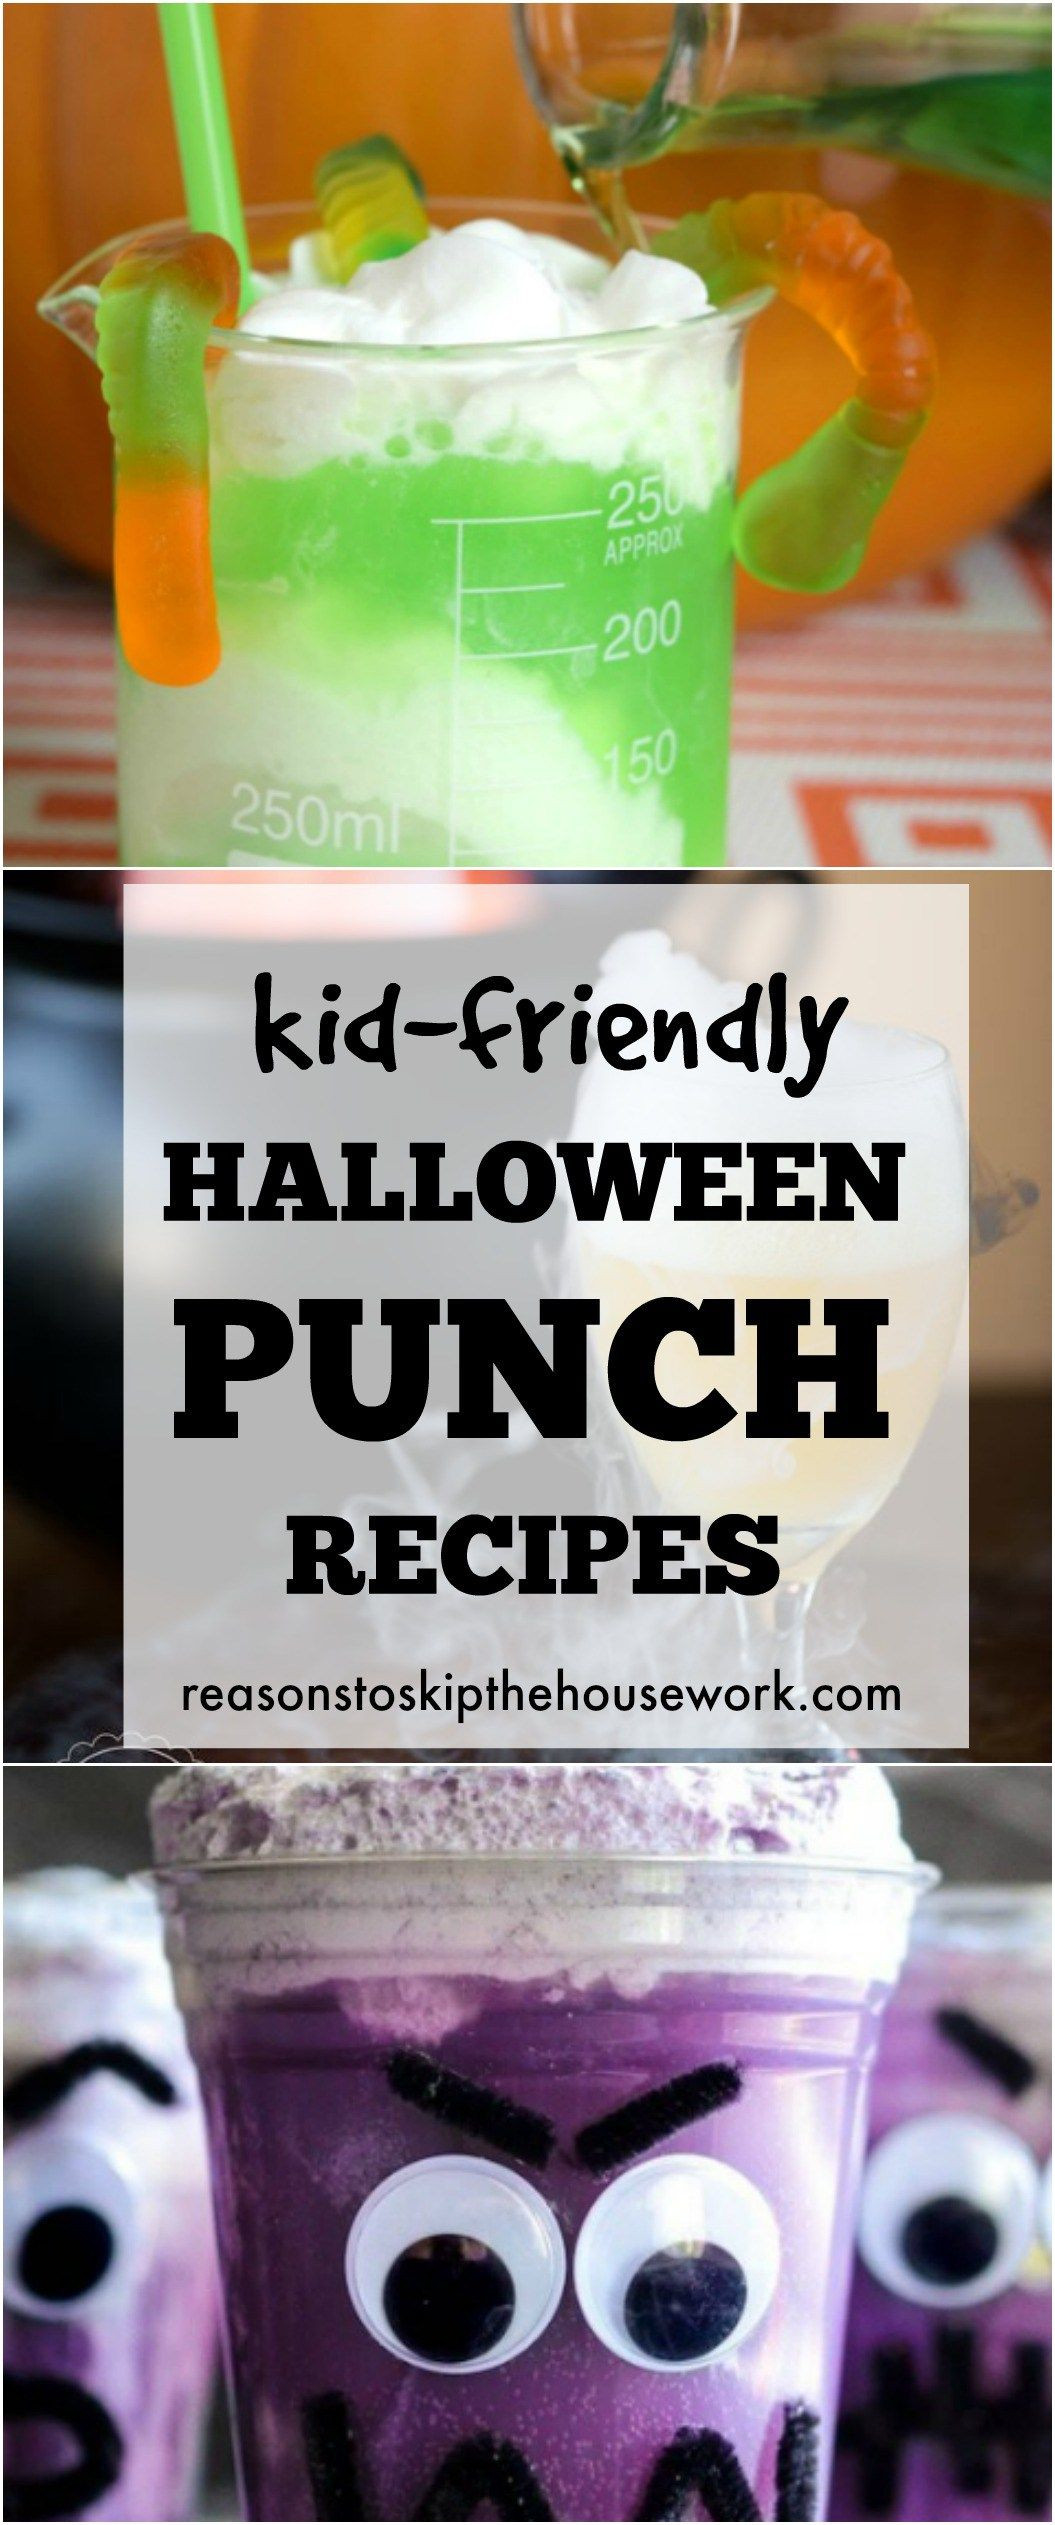 Halloween Punch For Kids-DIY
 Kid Friendly Halloween Punch Recipes that are sure to